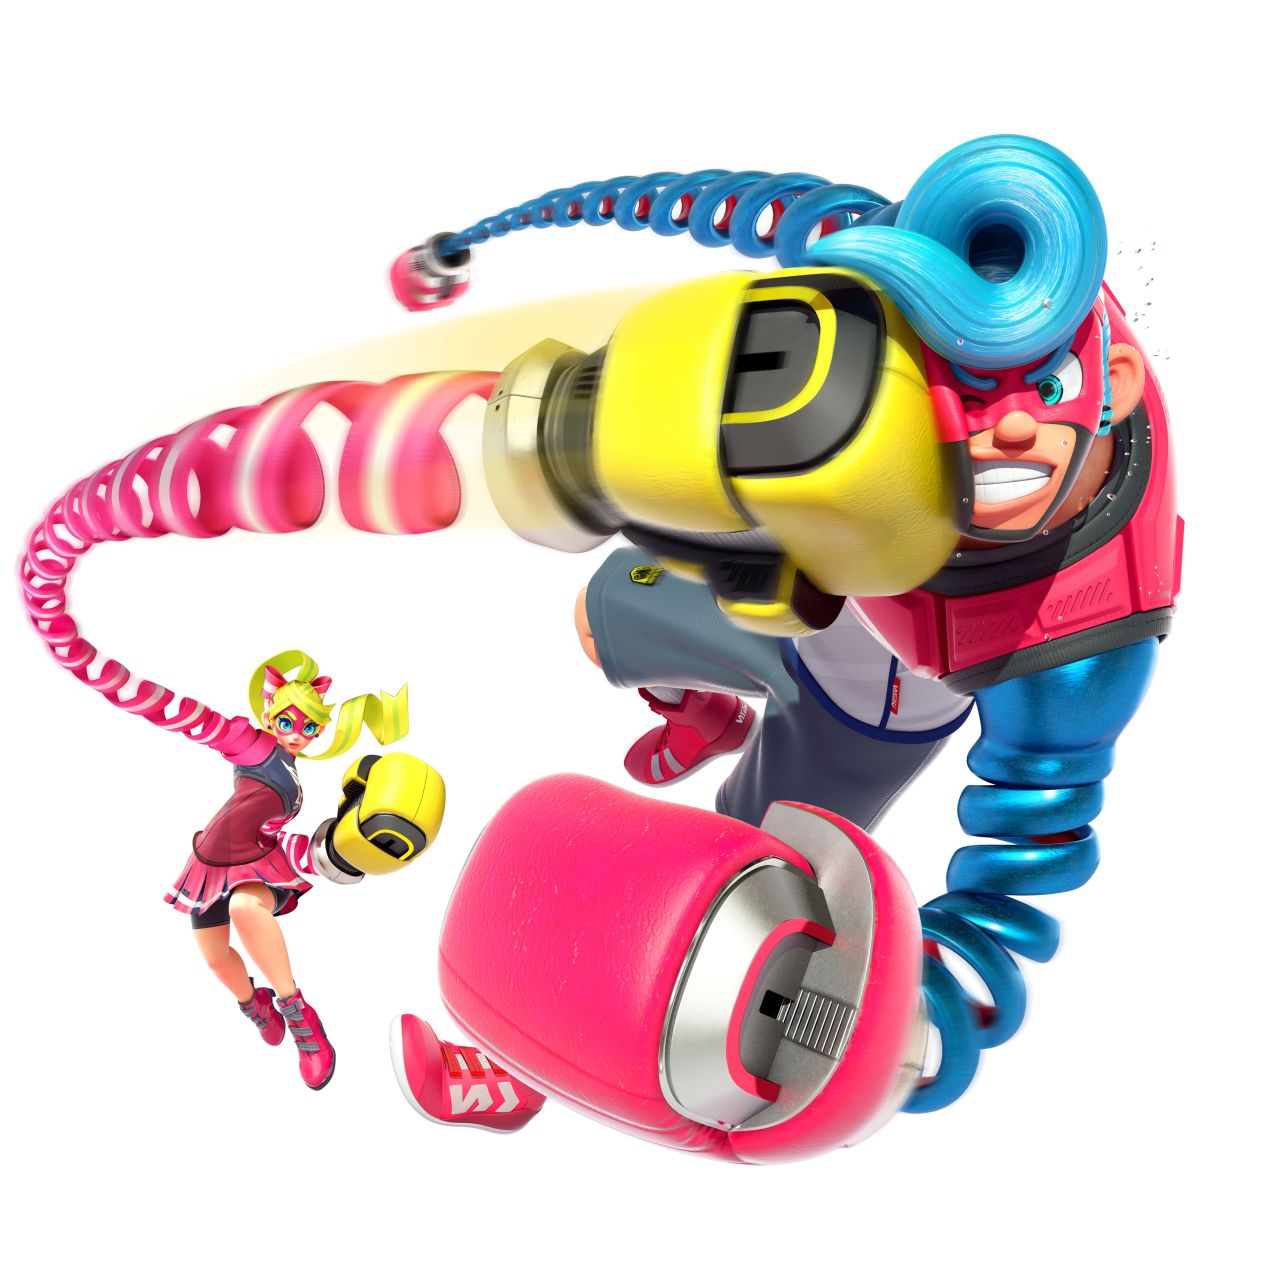 Image for Arms, the Switch fighting game, is a lot more involved than Wii Fit boxing flailing